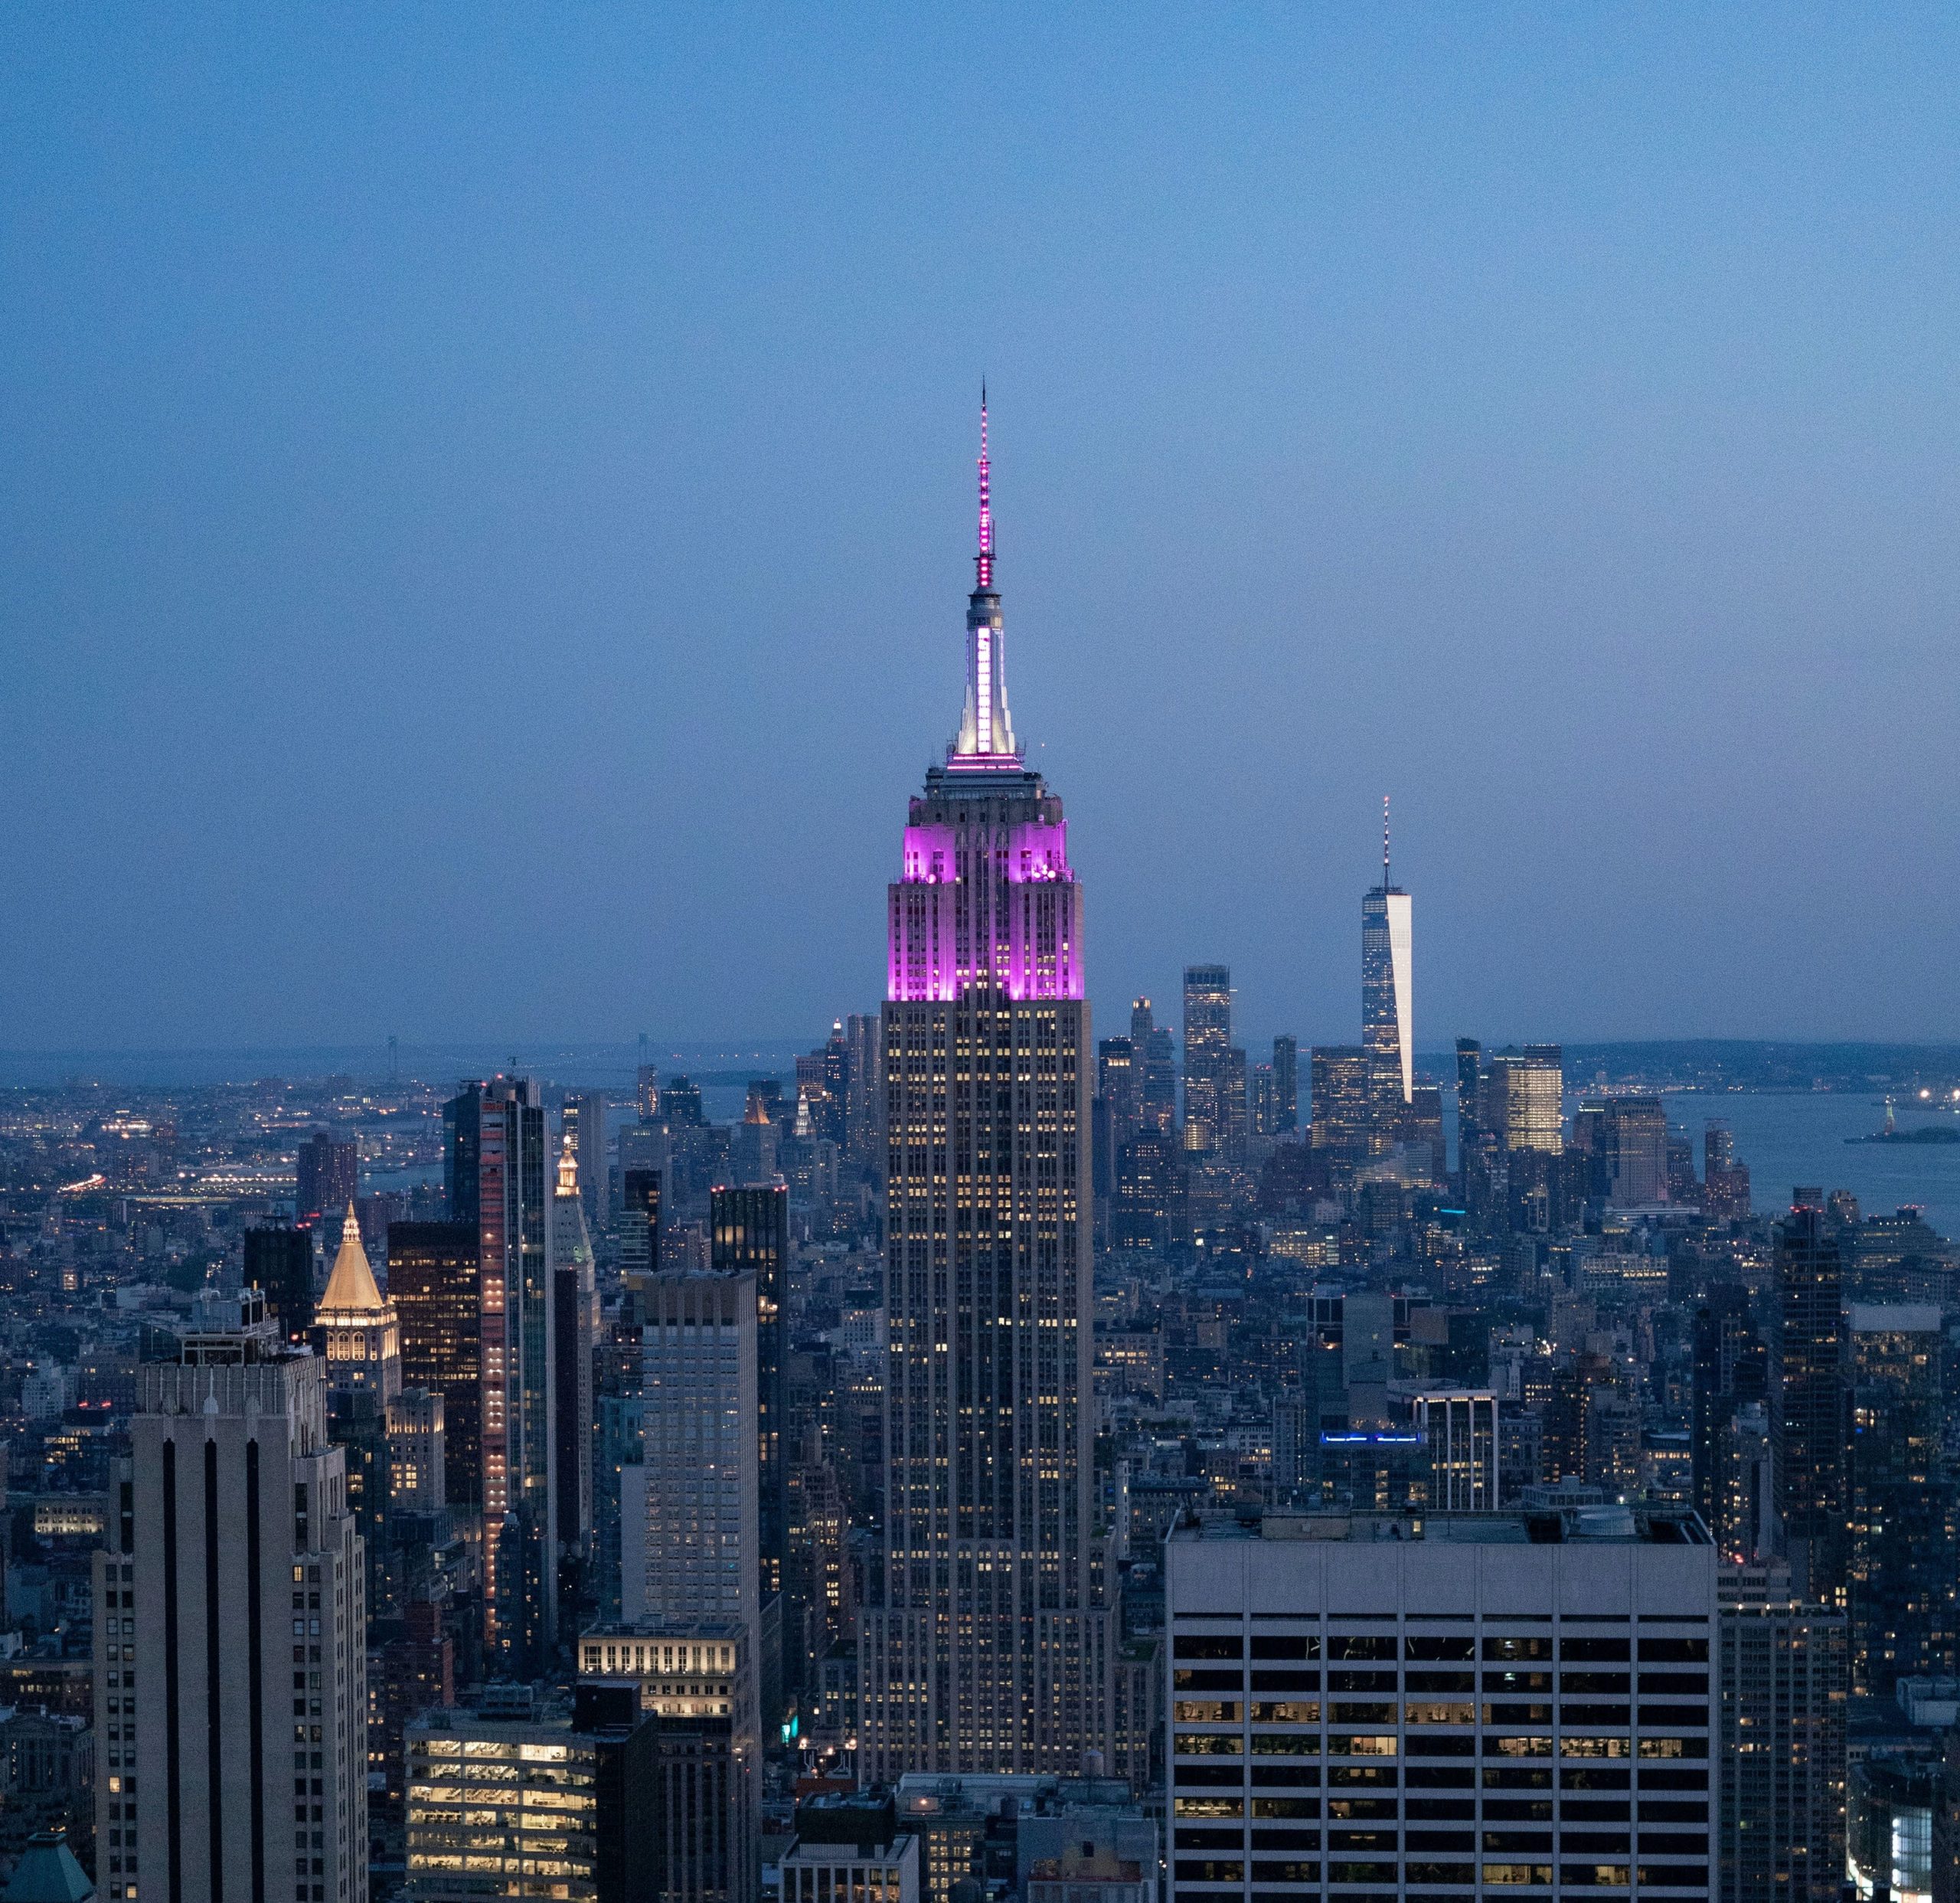 The Empire State Building lit up in violet.